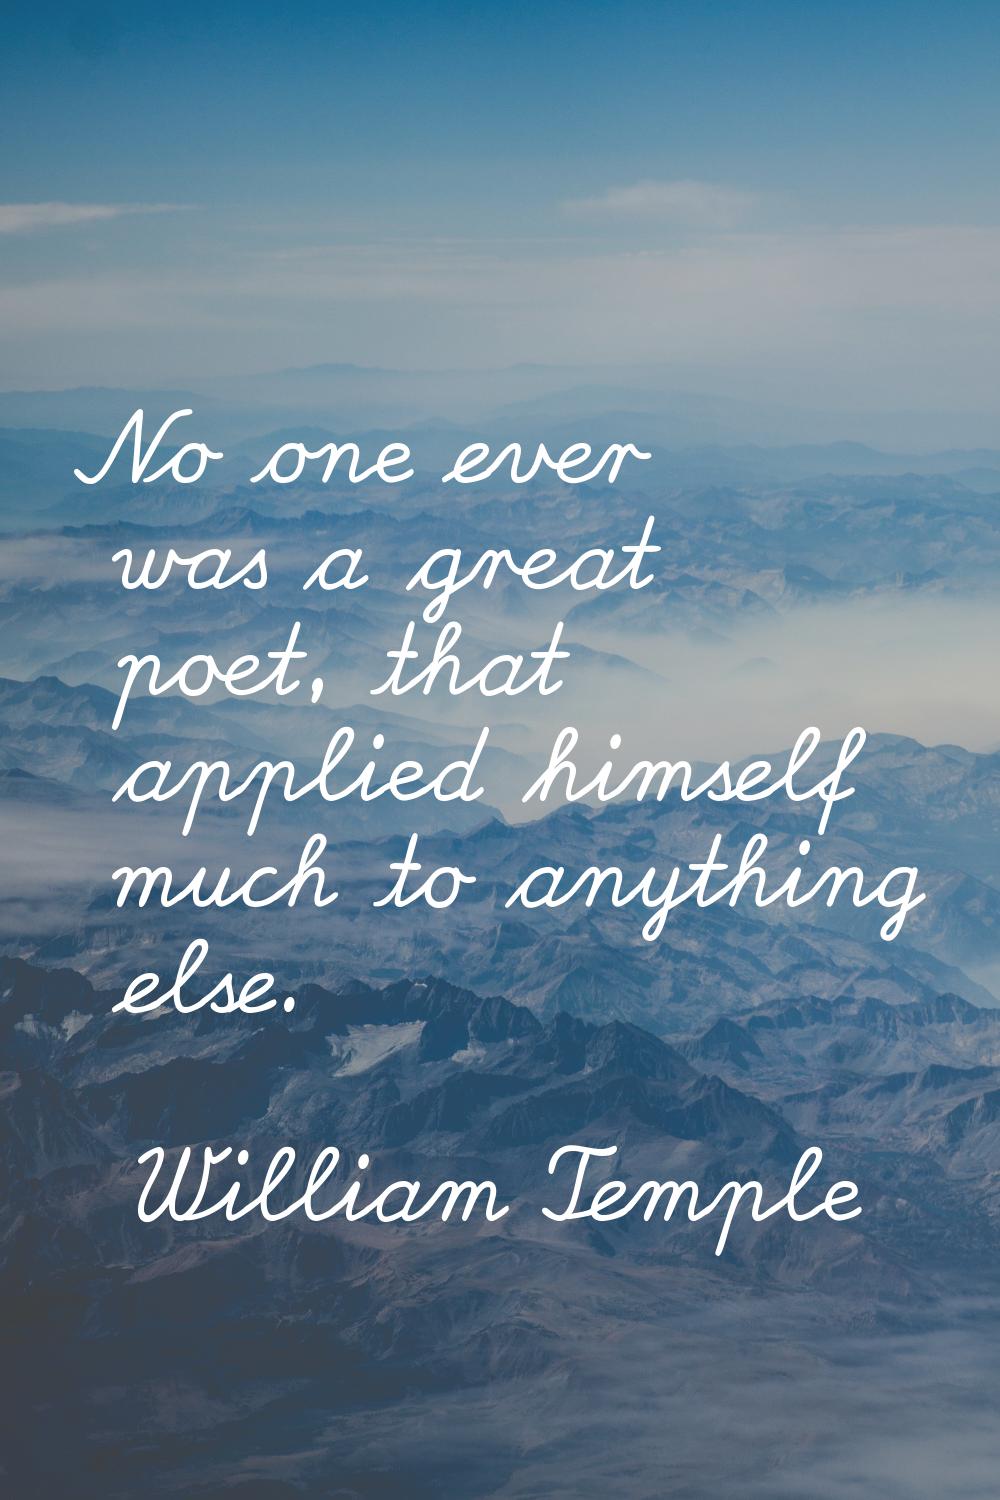 No one ever was a great poet, that applied himself much to anything else.